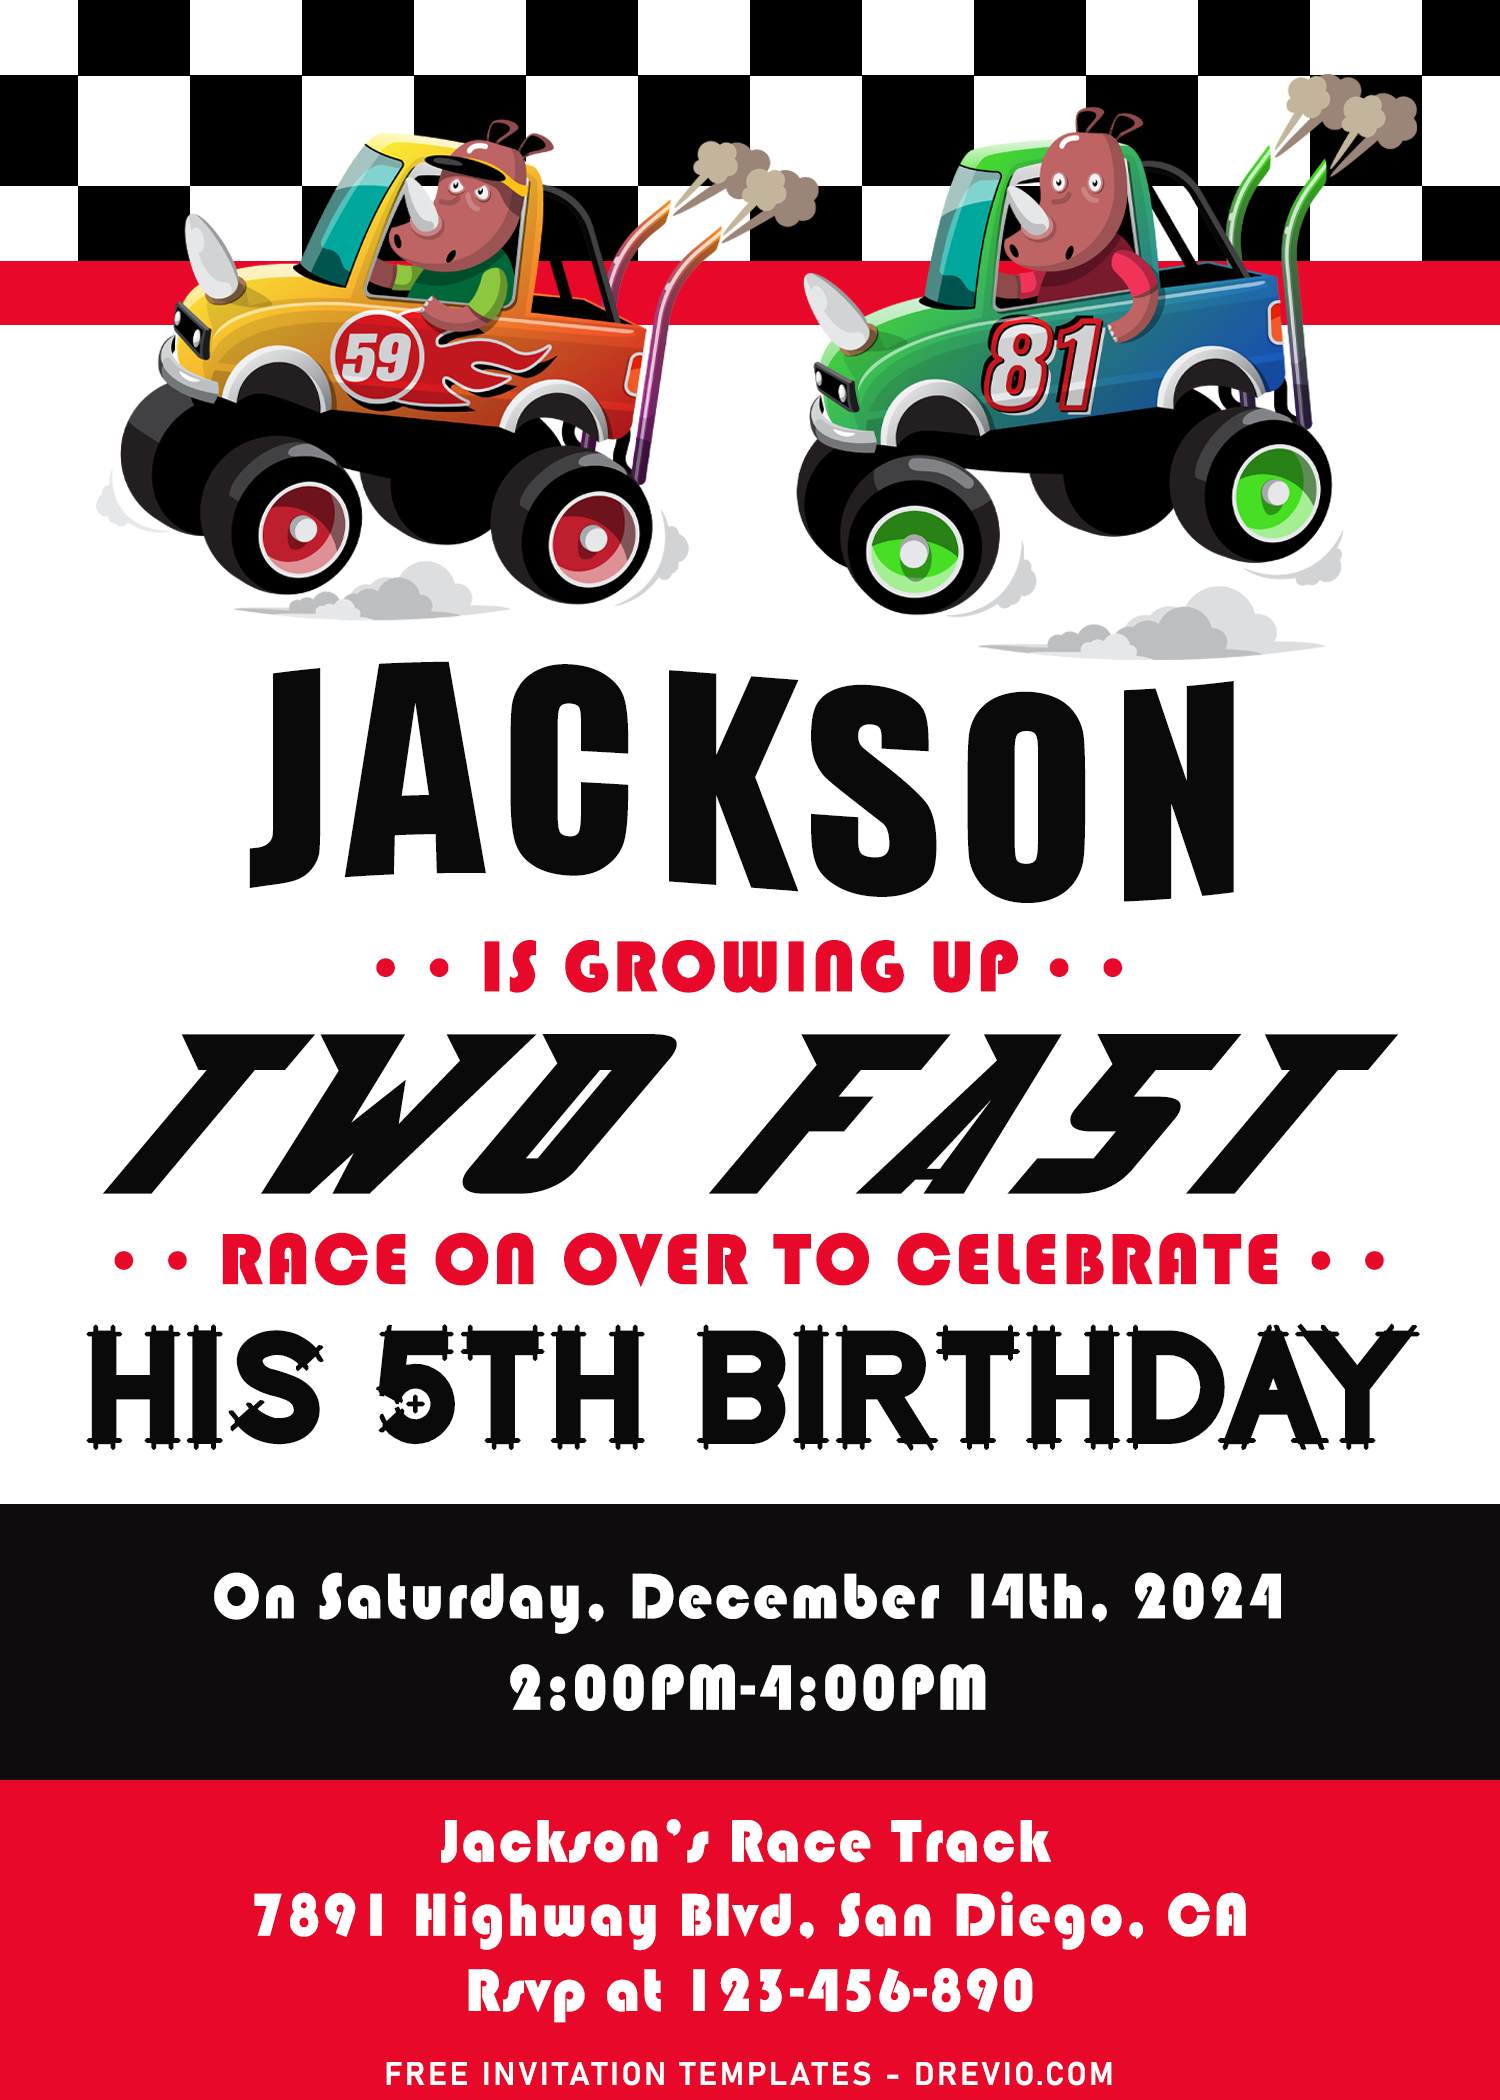 Growing up Two Fast Birthday Invitation Template Racing Car 